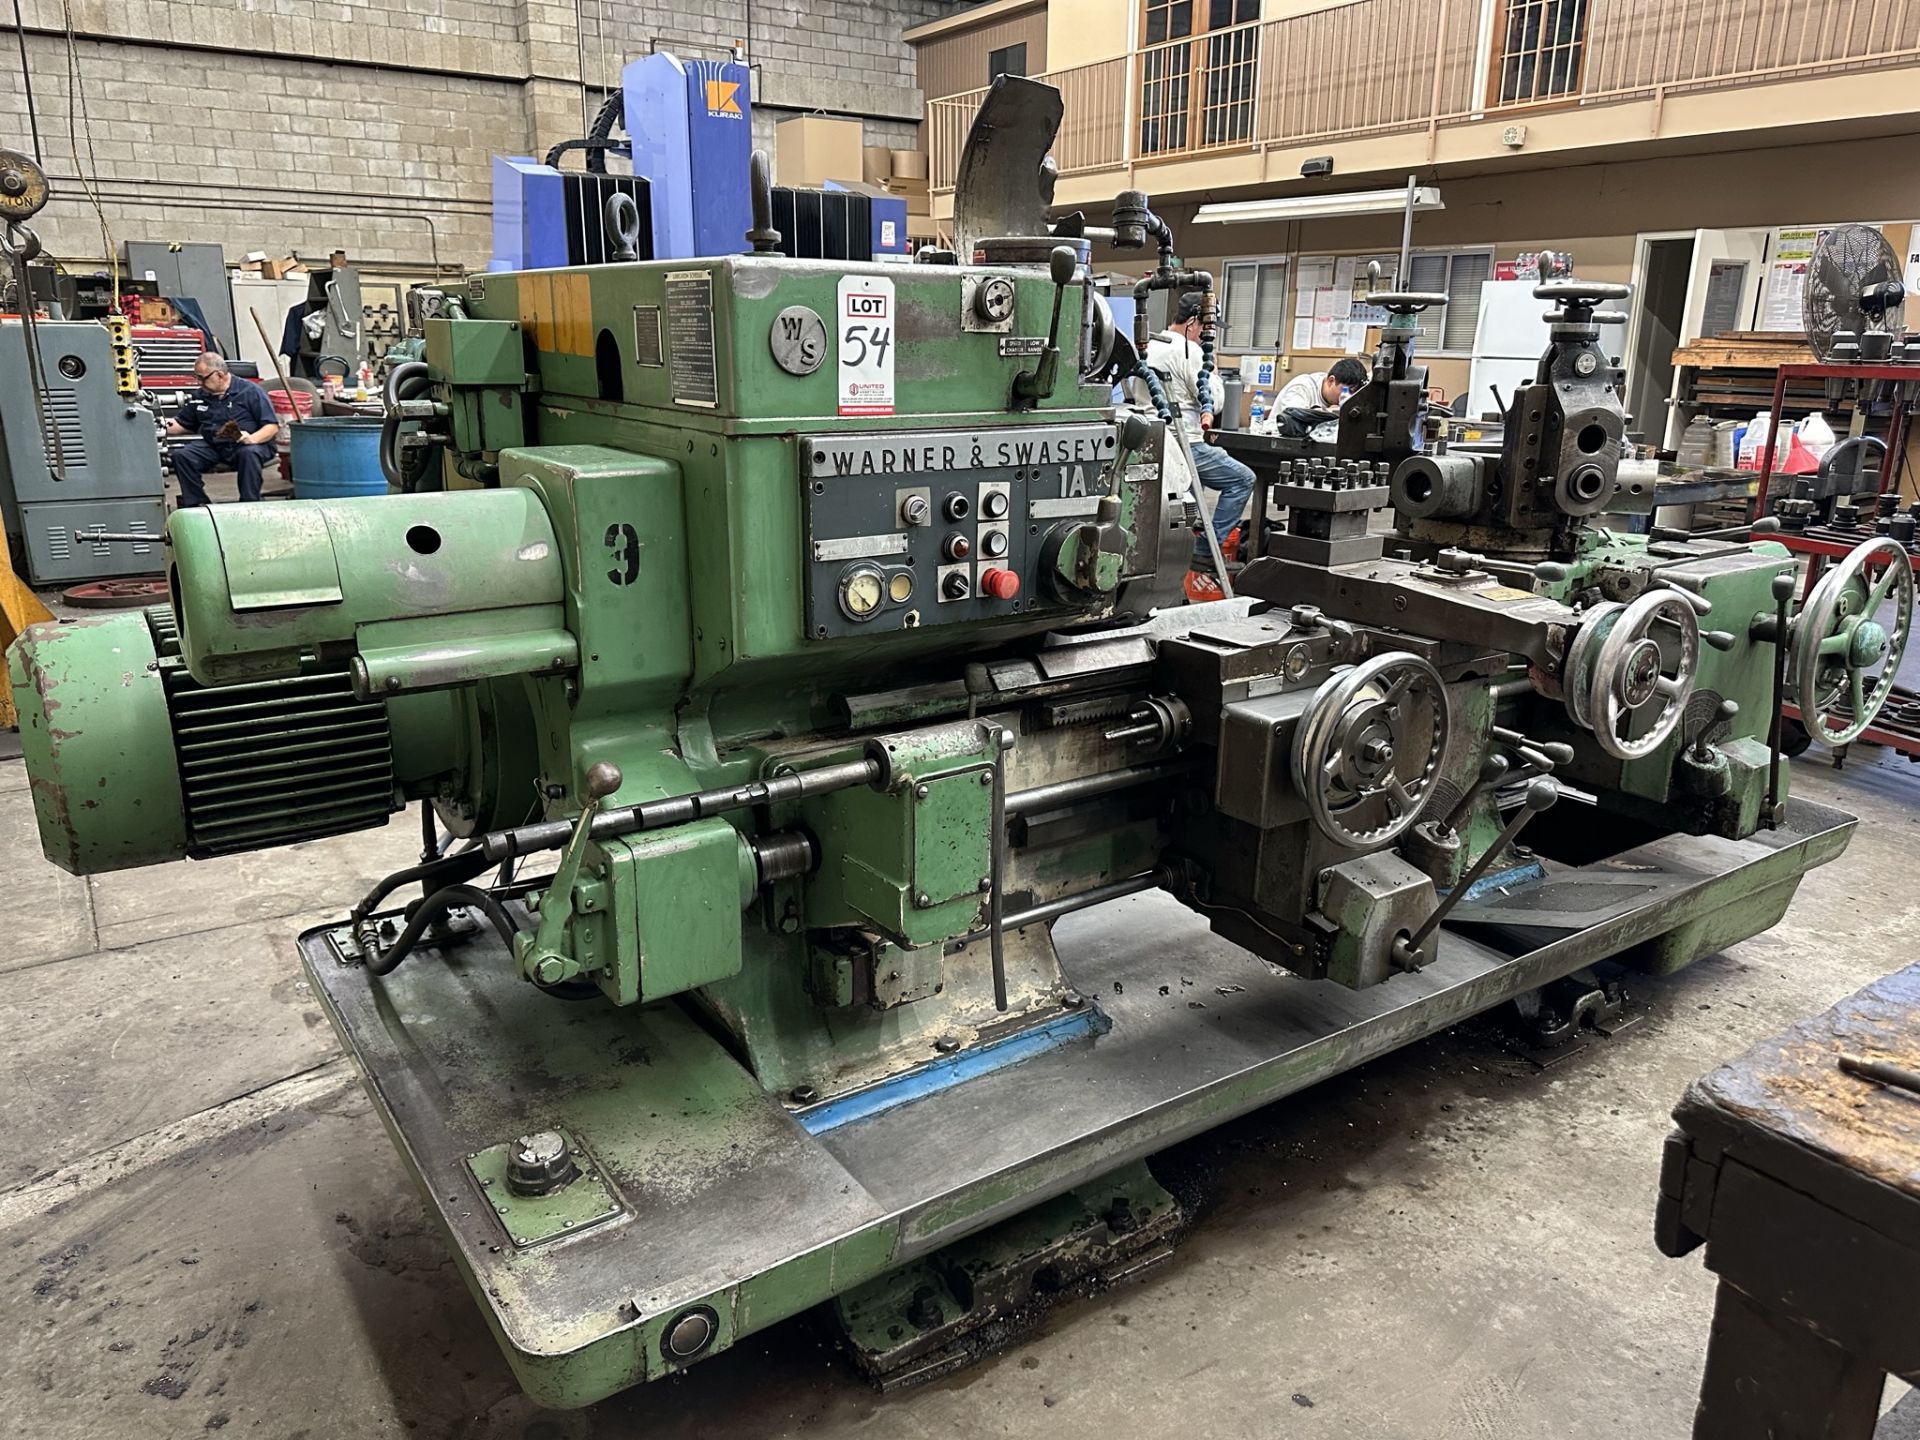 WARNER & SWASEY 1A M-3400 TURRET LATHE, 20 HP, 3-1/4" THROUGH HOLE, 15" 3-JAW CHUCK, S/N 2417378,